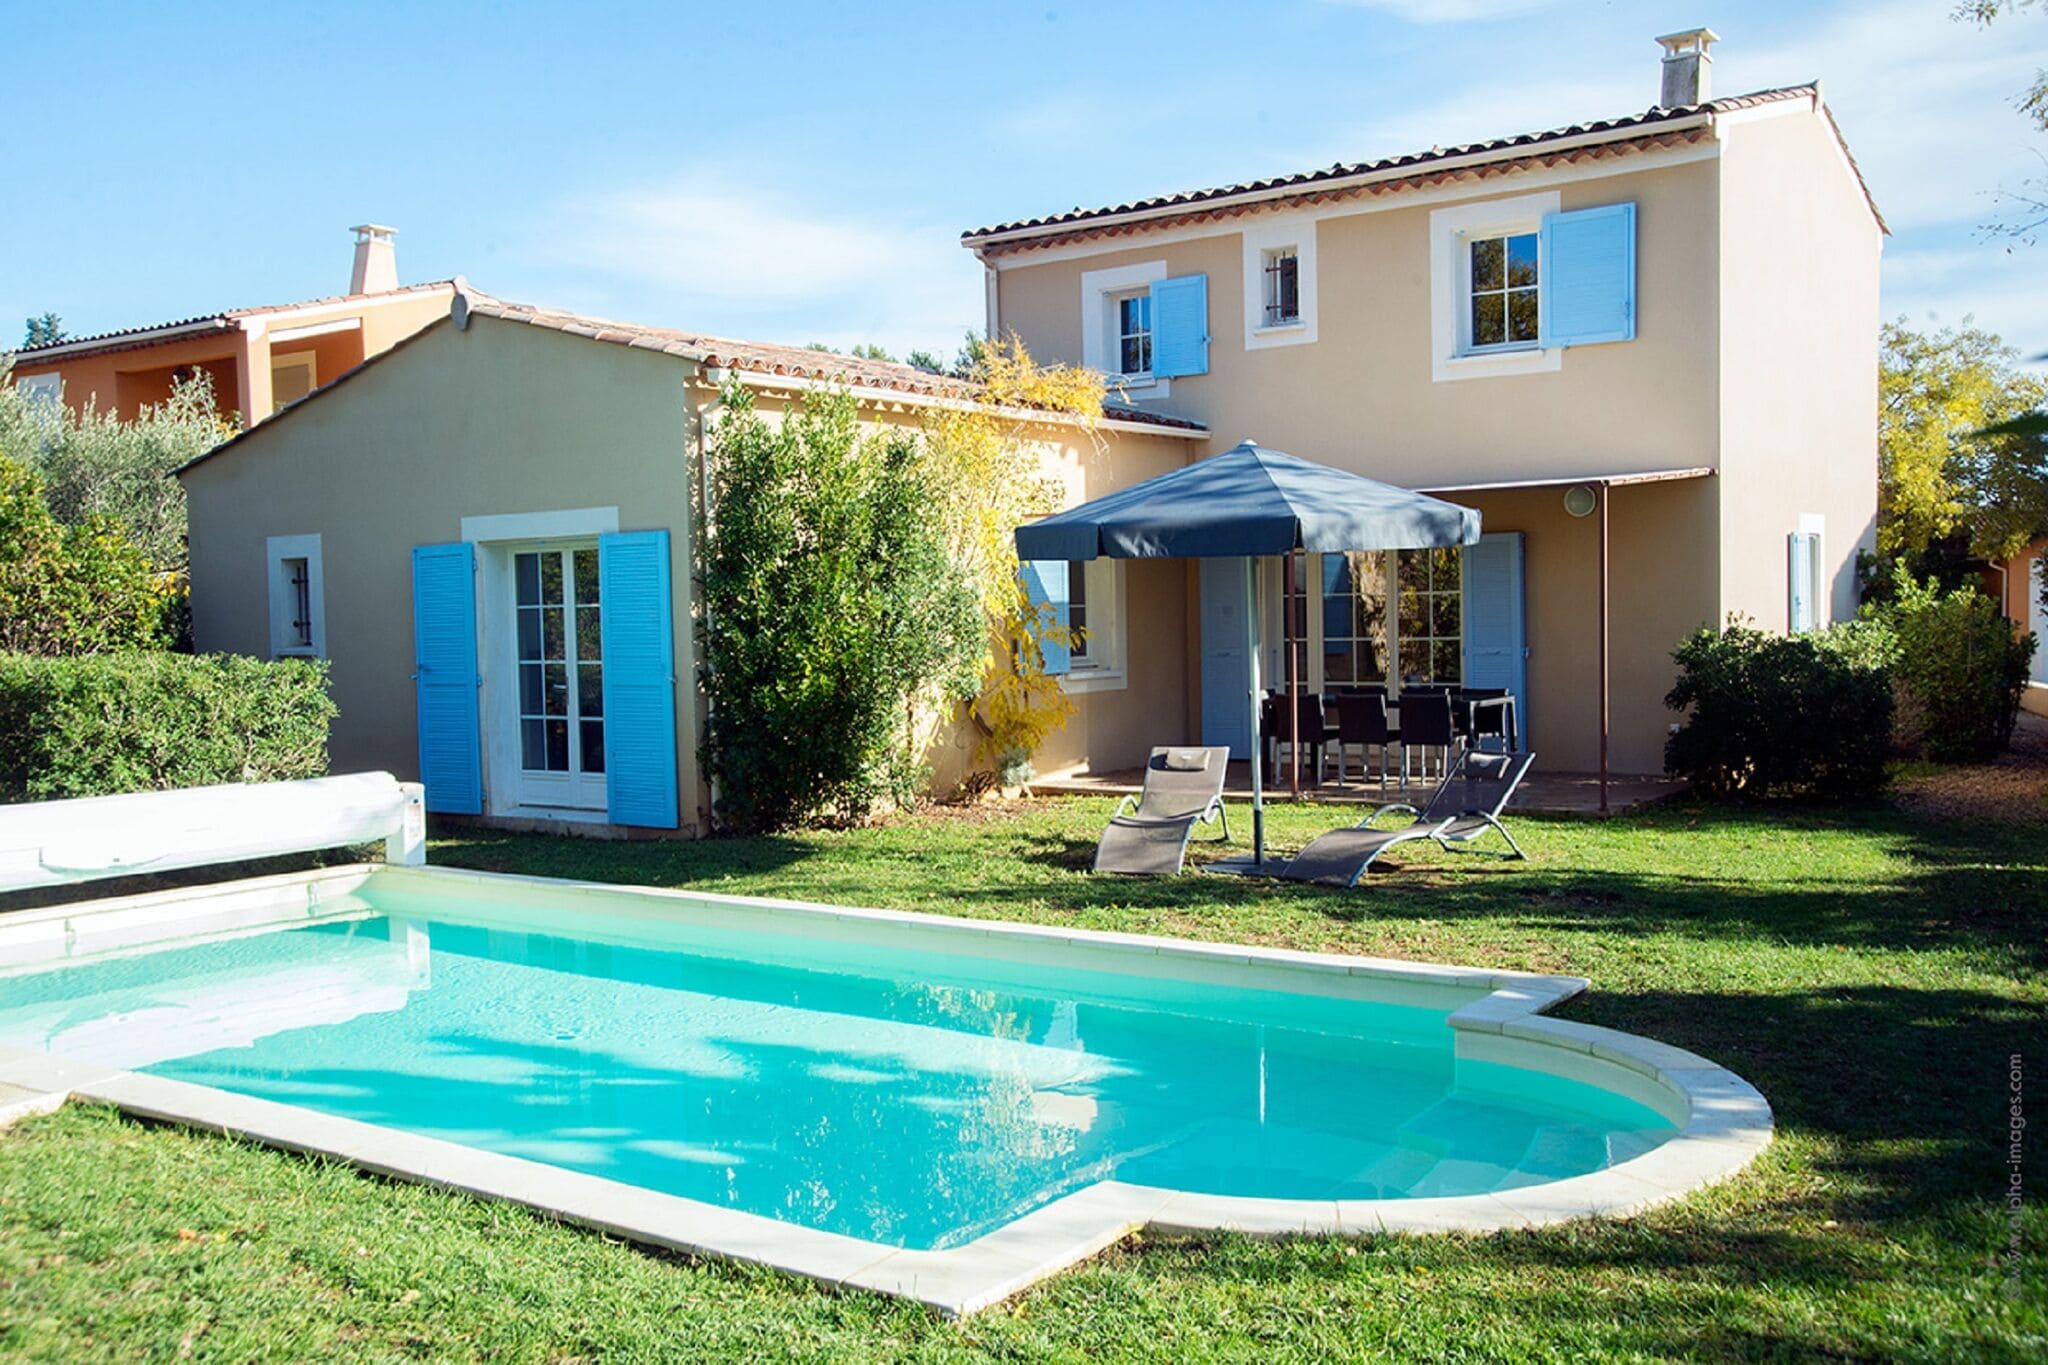 Luxurious Provencal villa with private pool in St. Saturnin-les-Apt